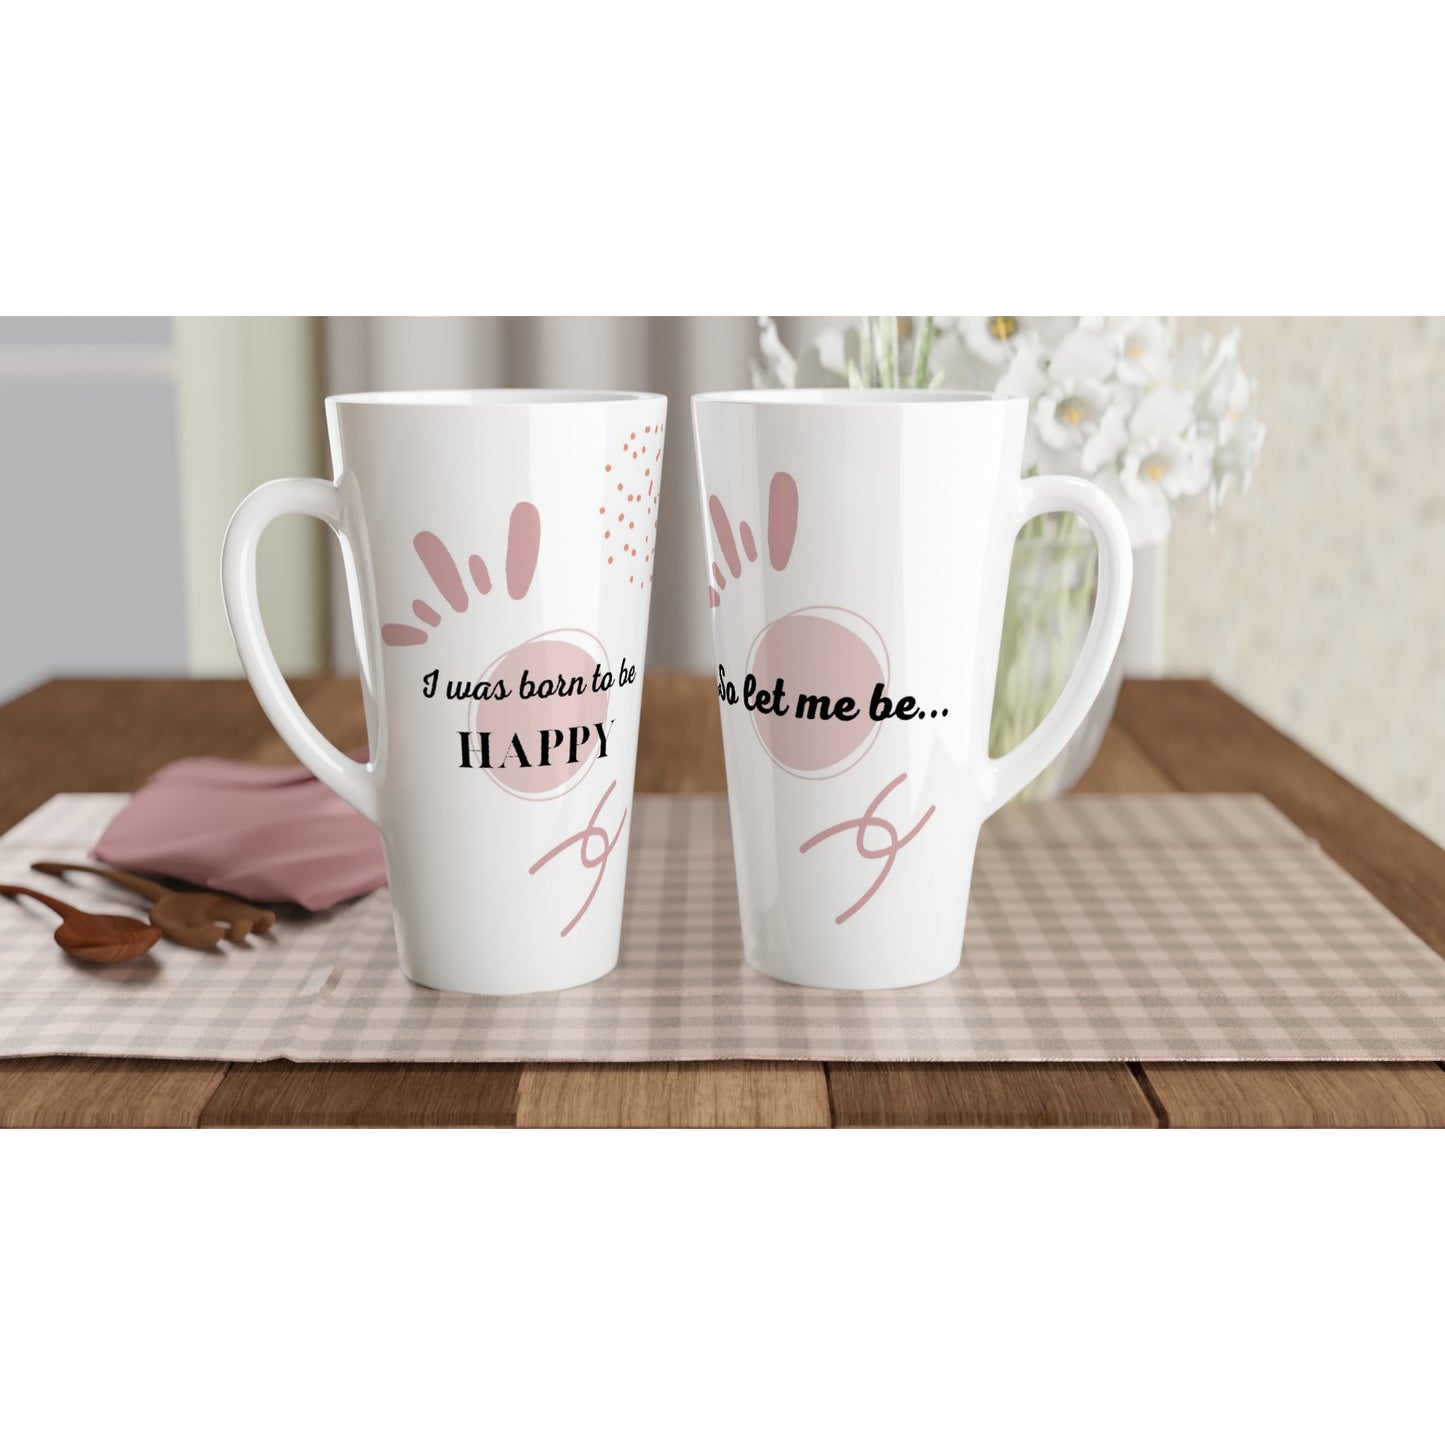 Inspirational Quote Latte 17oz Ceramic Mug - ''I was born to be HAPPY, so let me be"